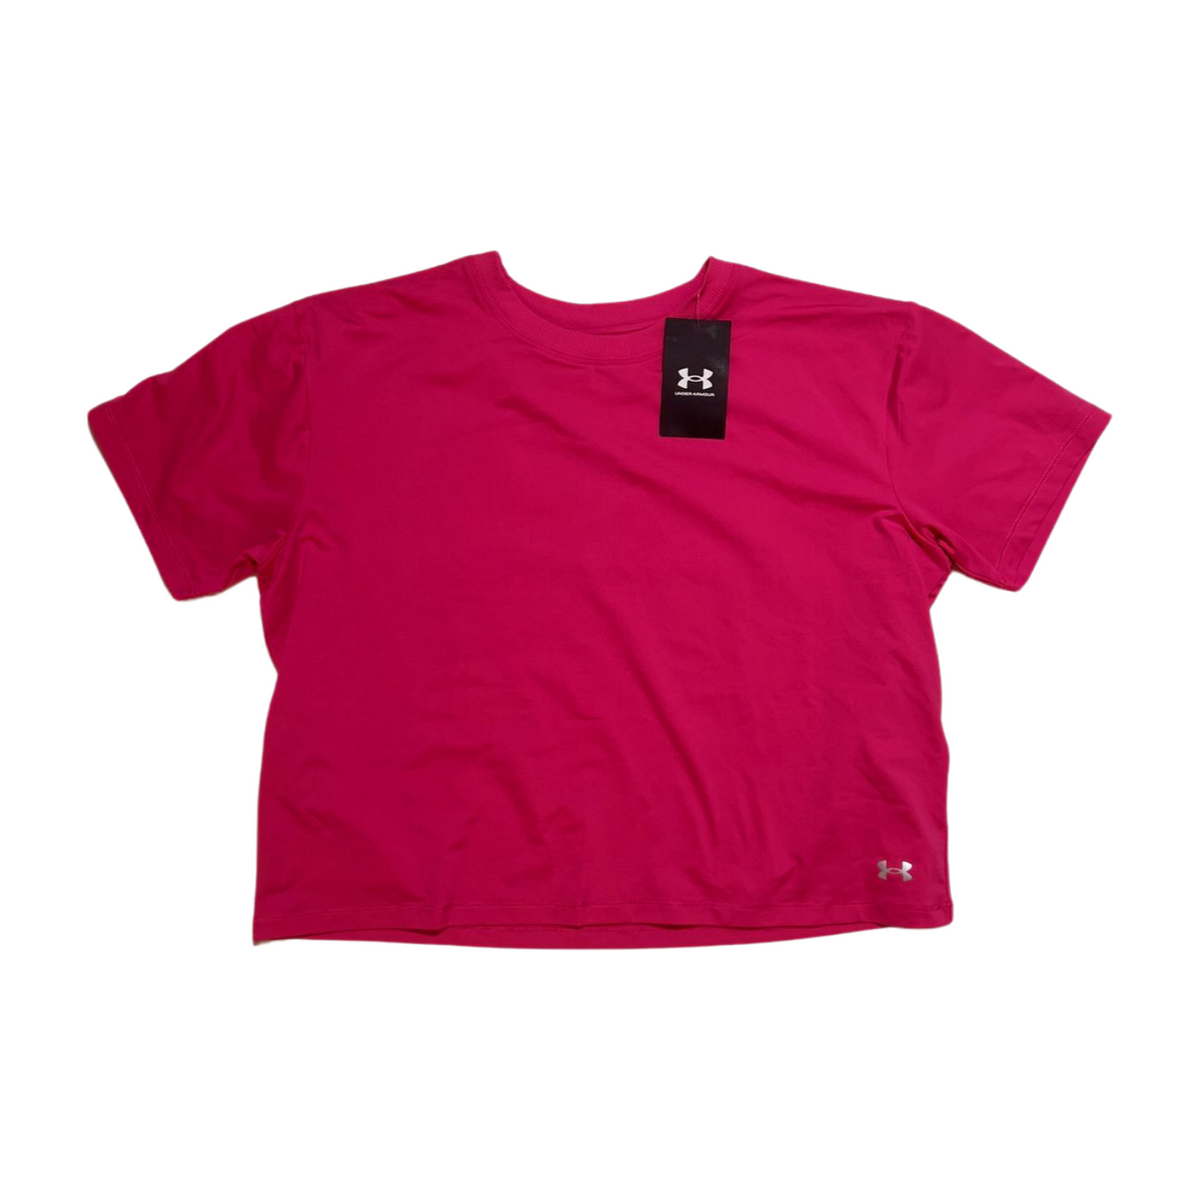 Under Armor- Pink Tee NEW WITH TAGS!